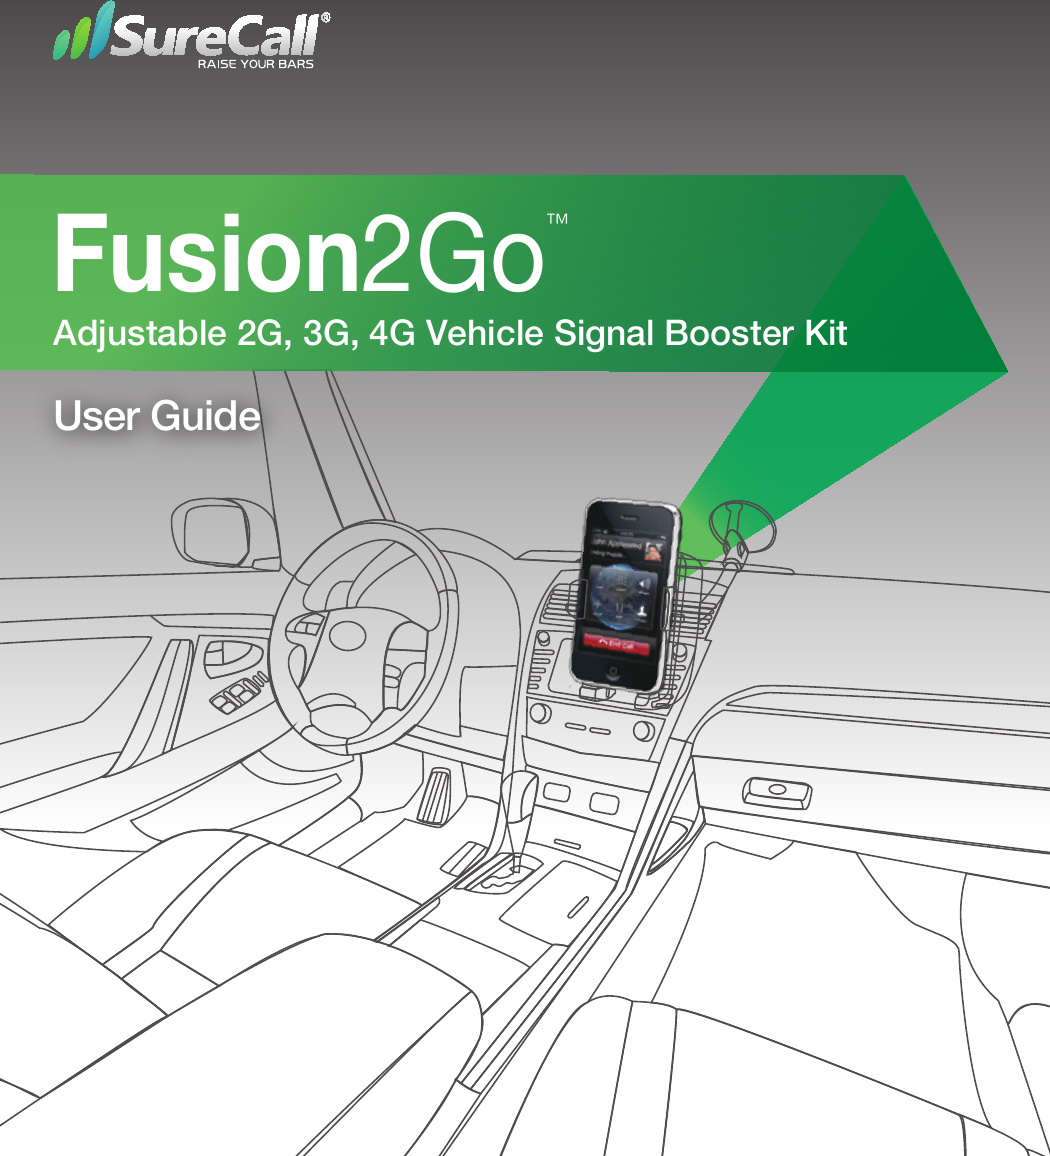  Fusion2Go  Adjustable 2G, 3G, 4G Vehicle Signal Booster Kit™User Guide 